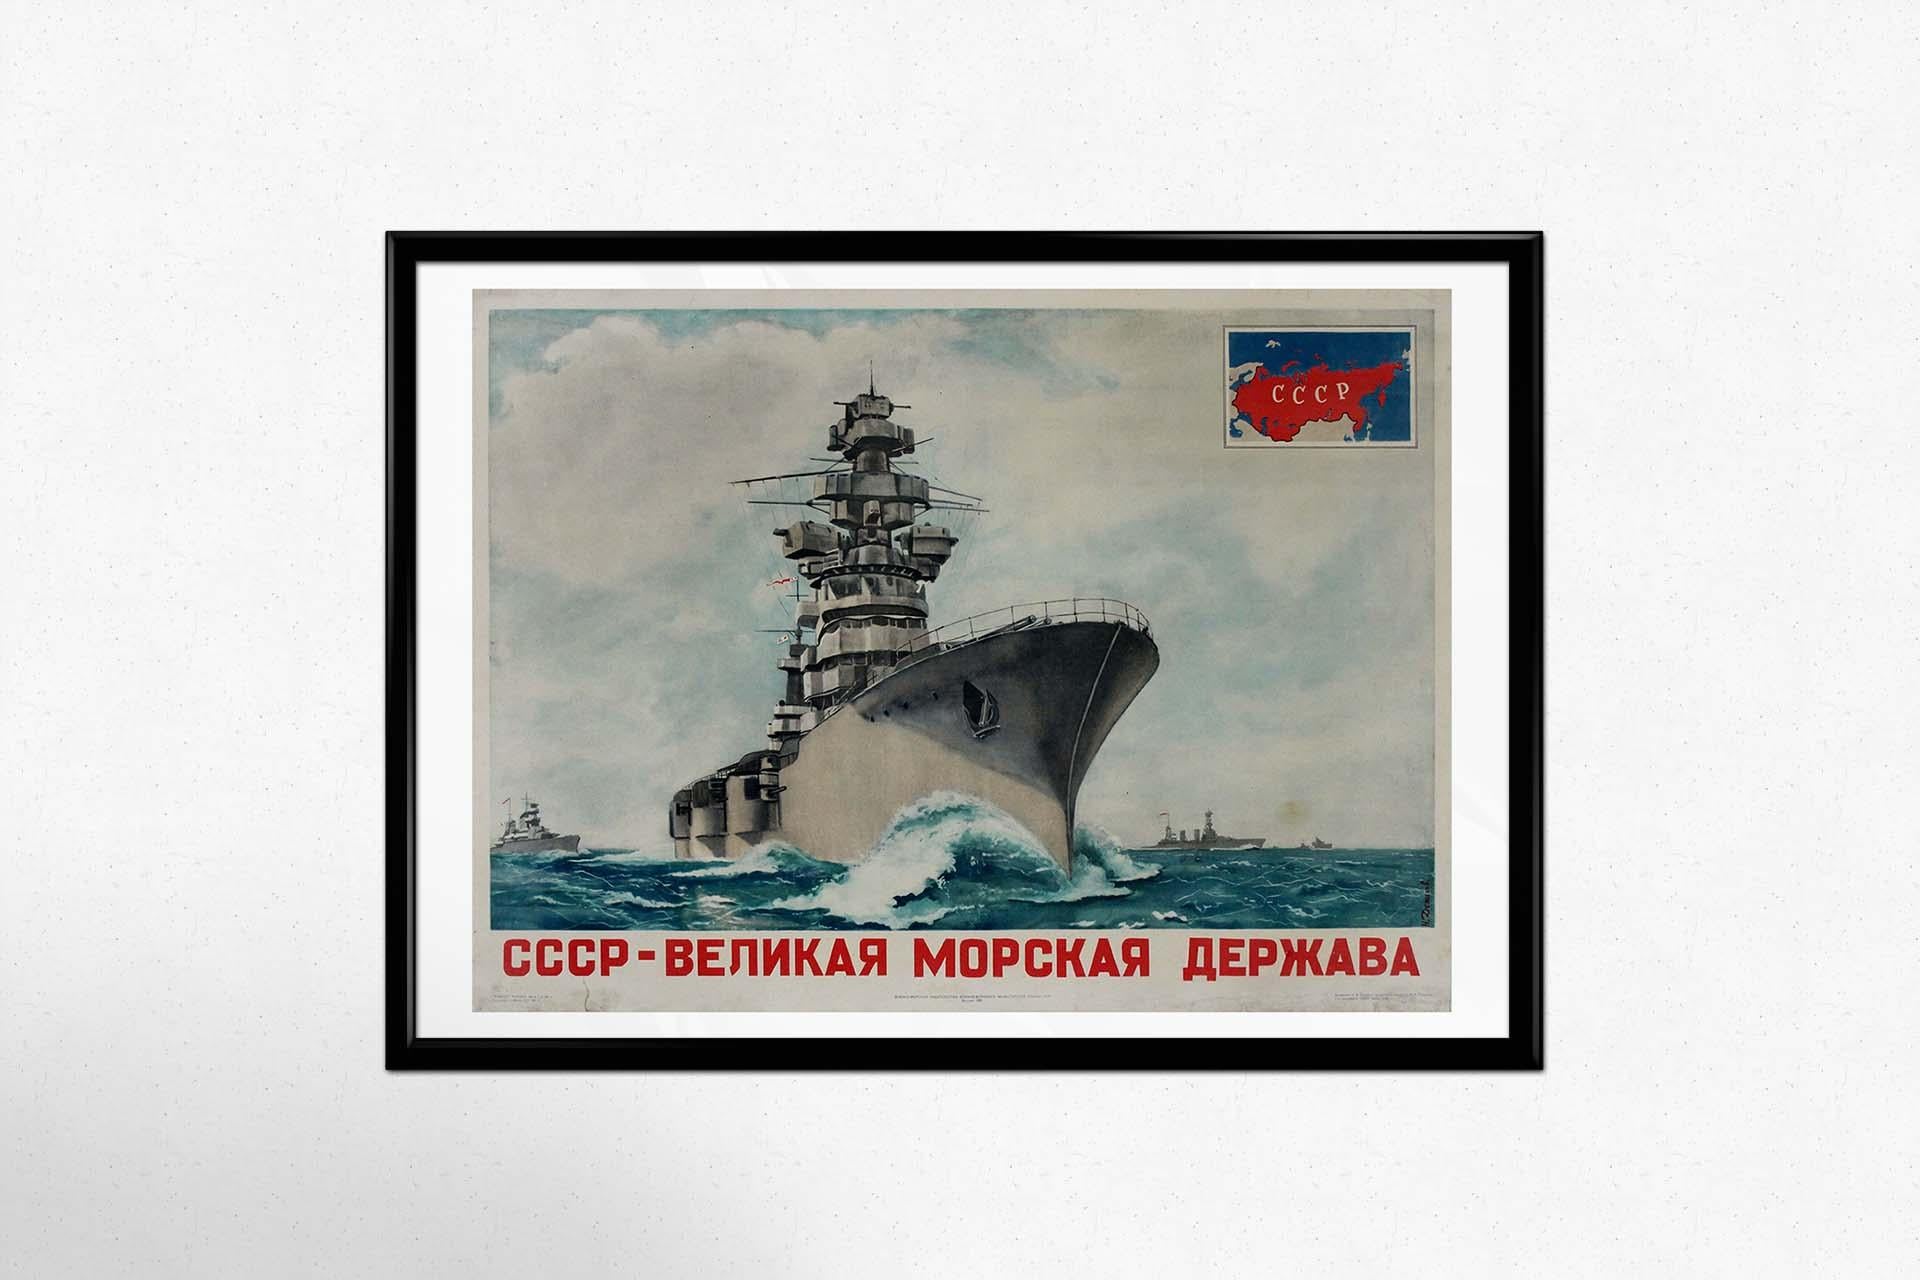 The original Soviet propaganda poster created by N. Denisov in 1951, titled 